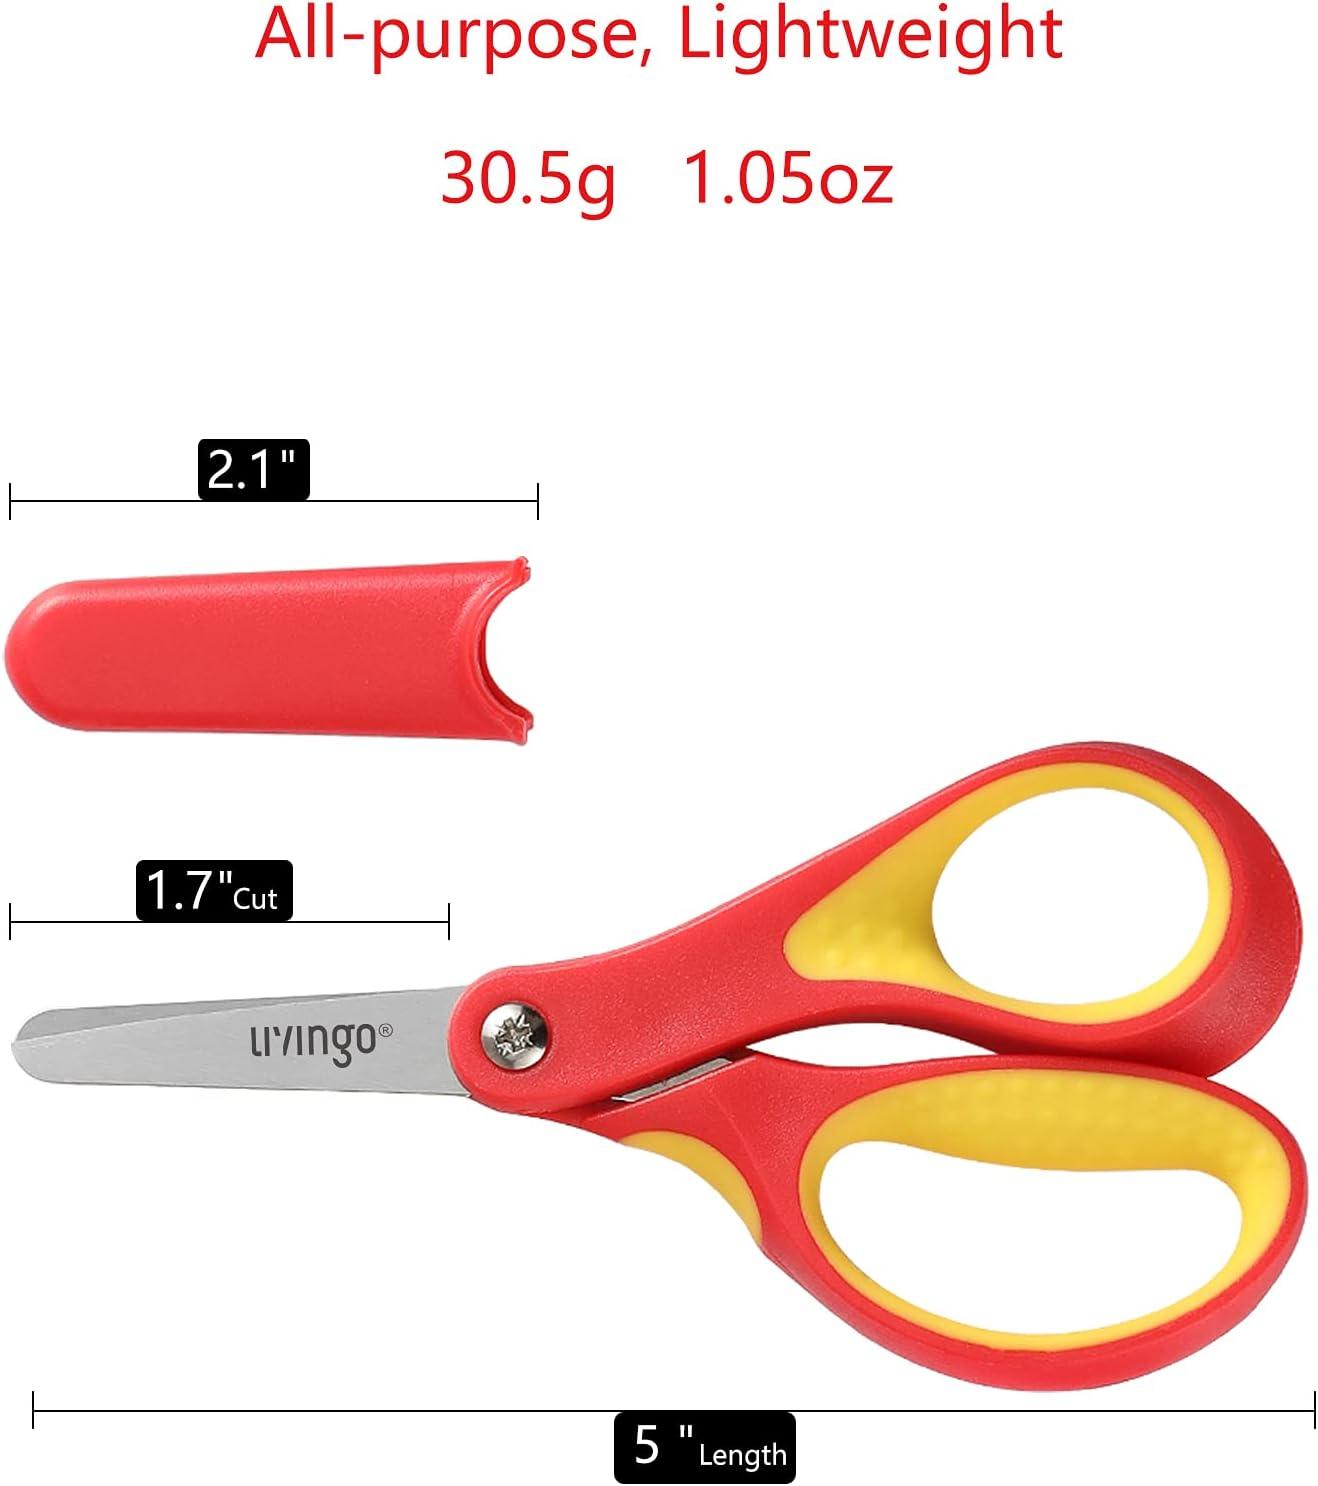  Kids Scissors,Small Safety Scissors With Cover,Student